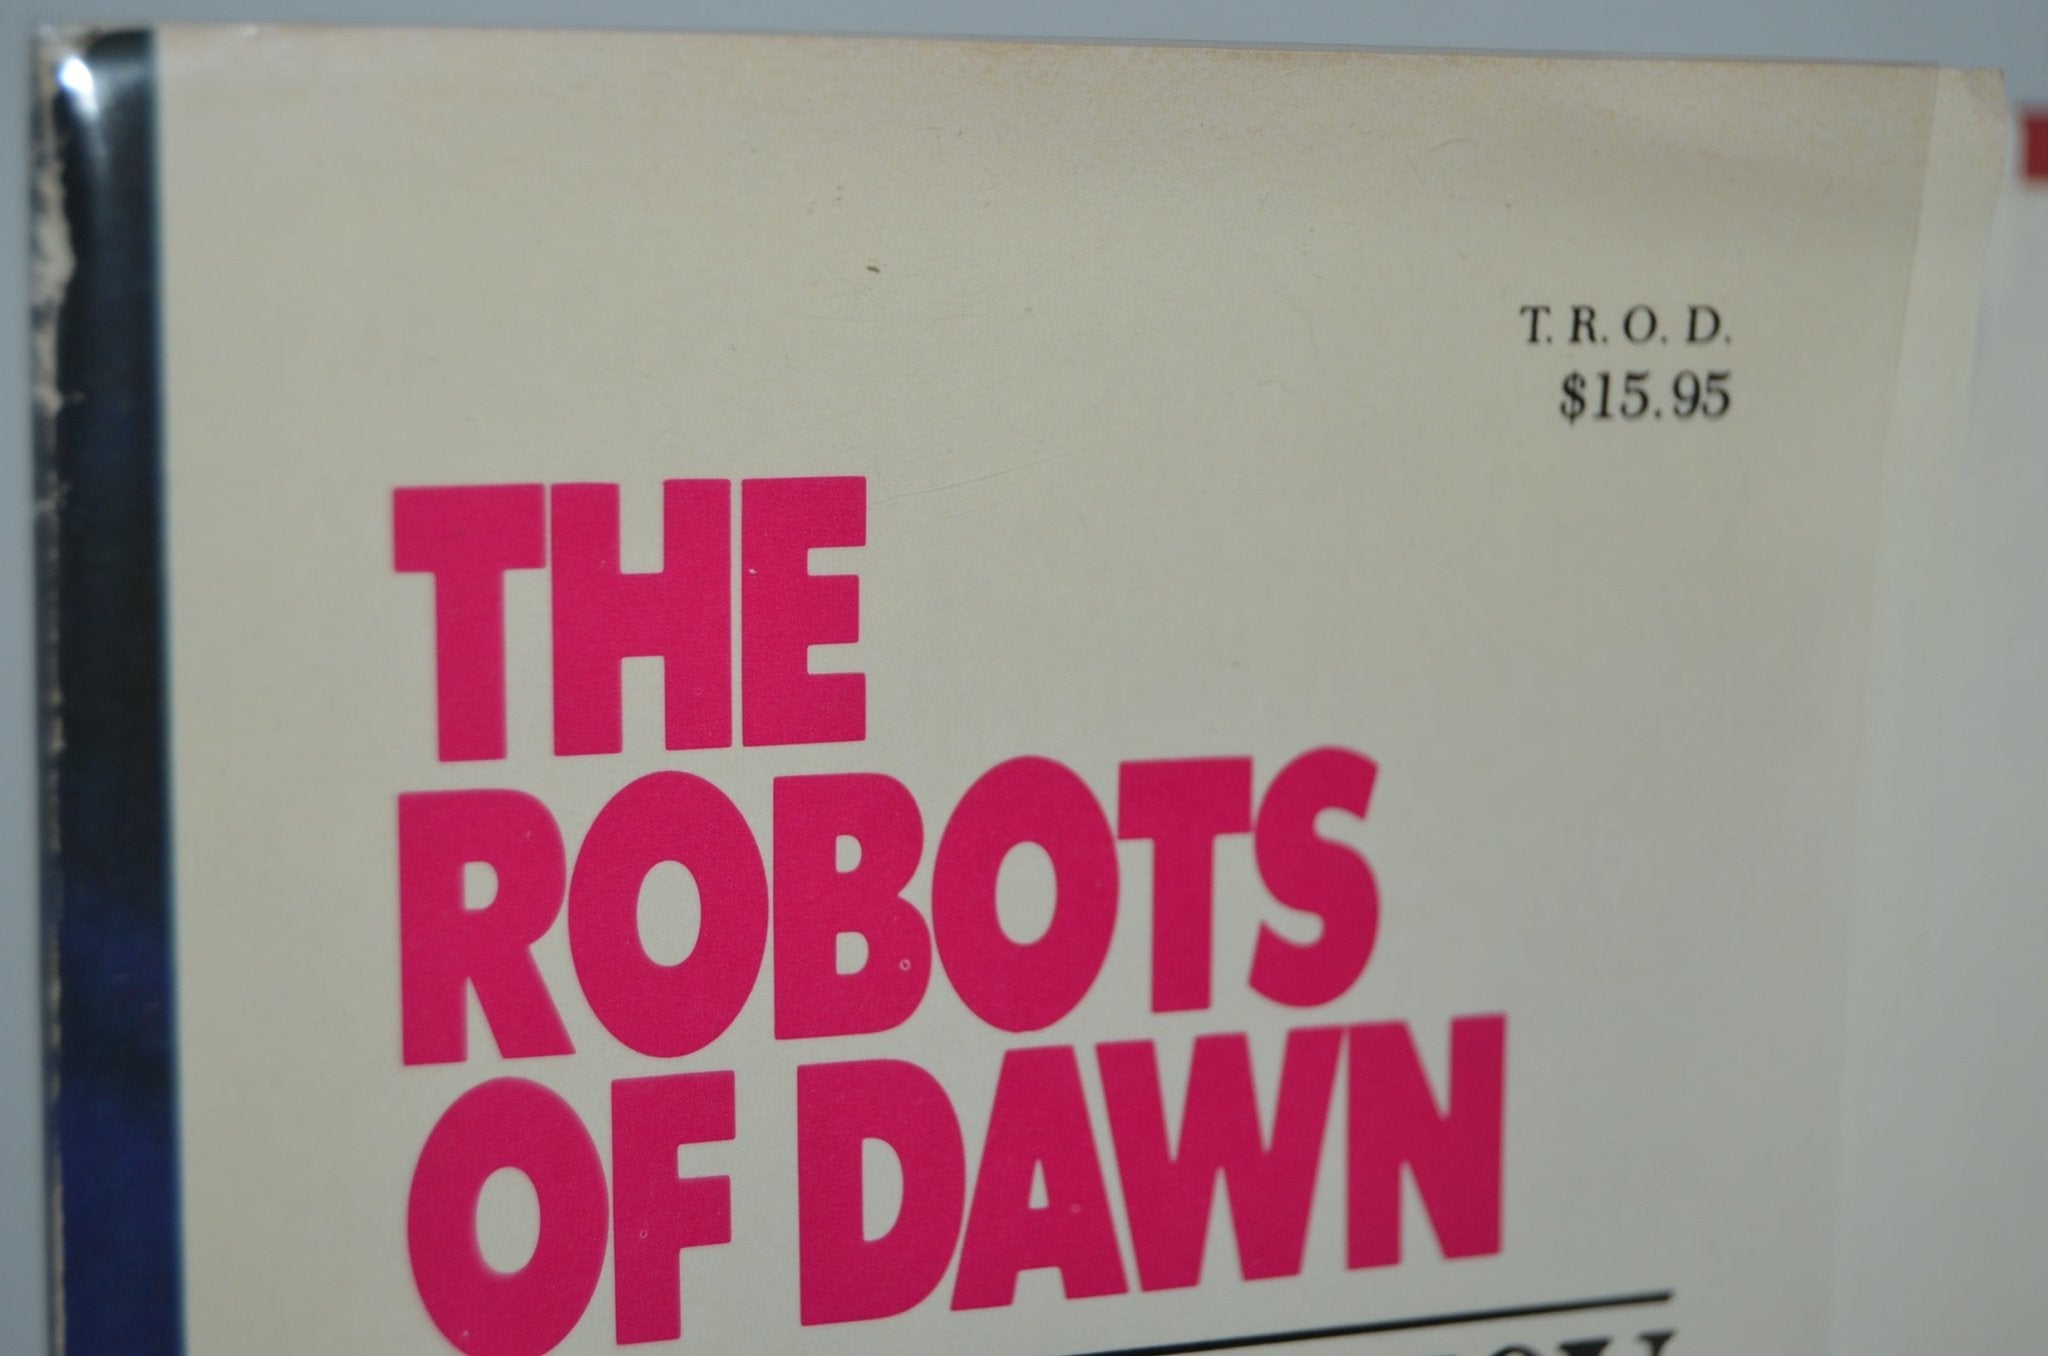 The Complete Robot Series by Isaac Asimov 1982-1985 - Brookfield Books